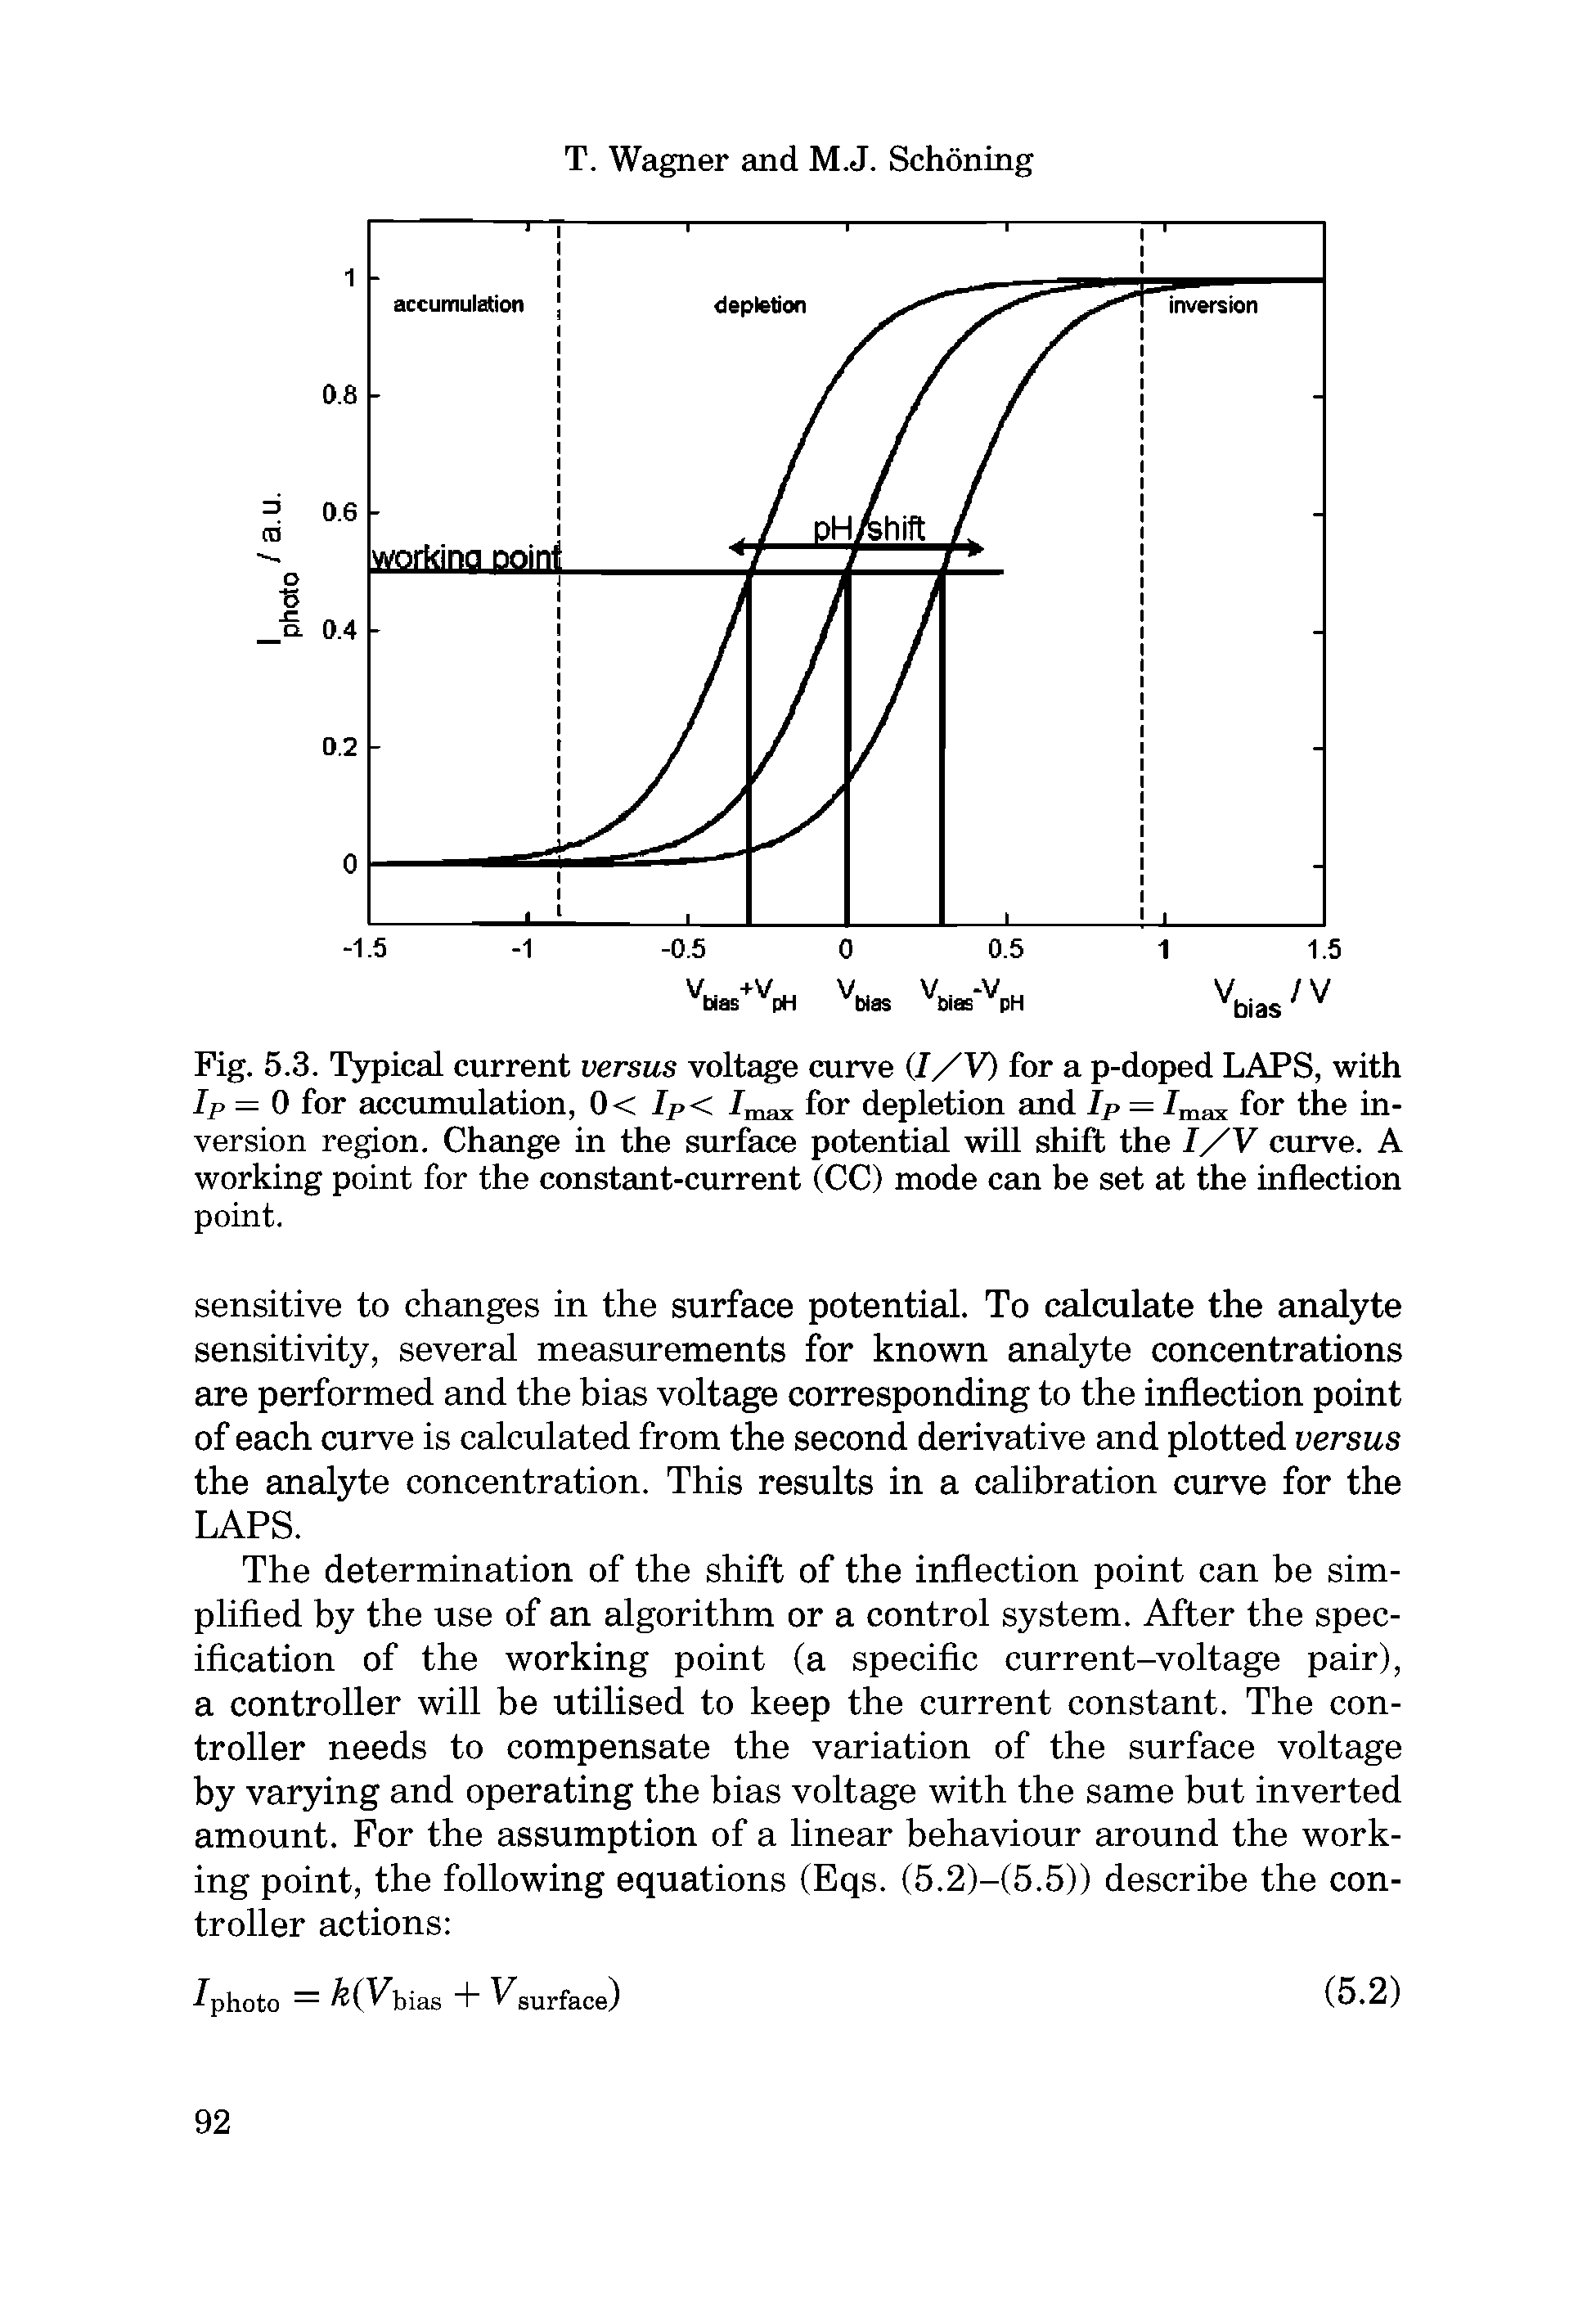 Fig. 5.3. Typical current versus voltage curve (I/V) for a p-doped LAPS, with Ip — 0 for accumulation, 0< IP< /max for depletion and IP — /max for the inversion region. Change in the surface potential will shift the I/V curve. A working point for the constant-current (CC) mode can be set at the inflection point.